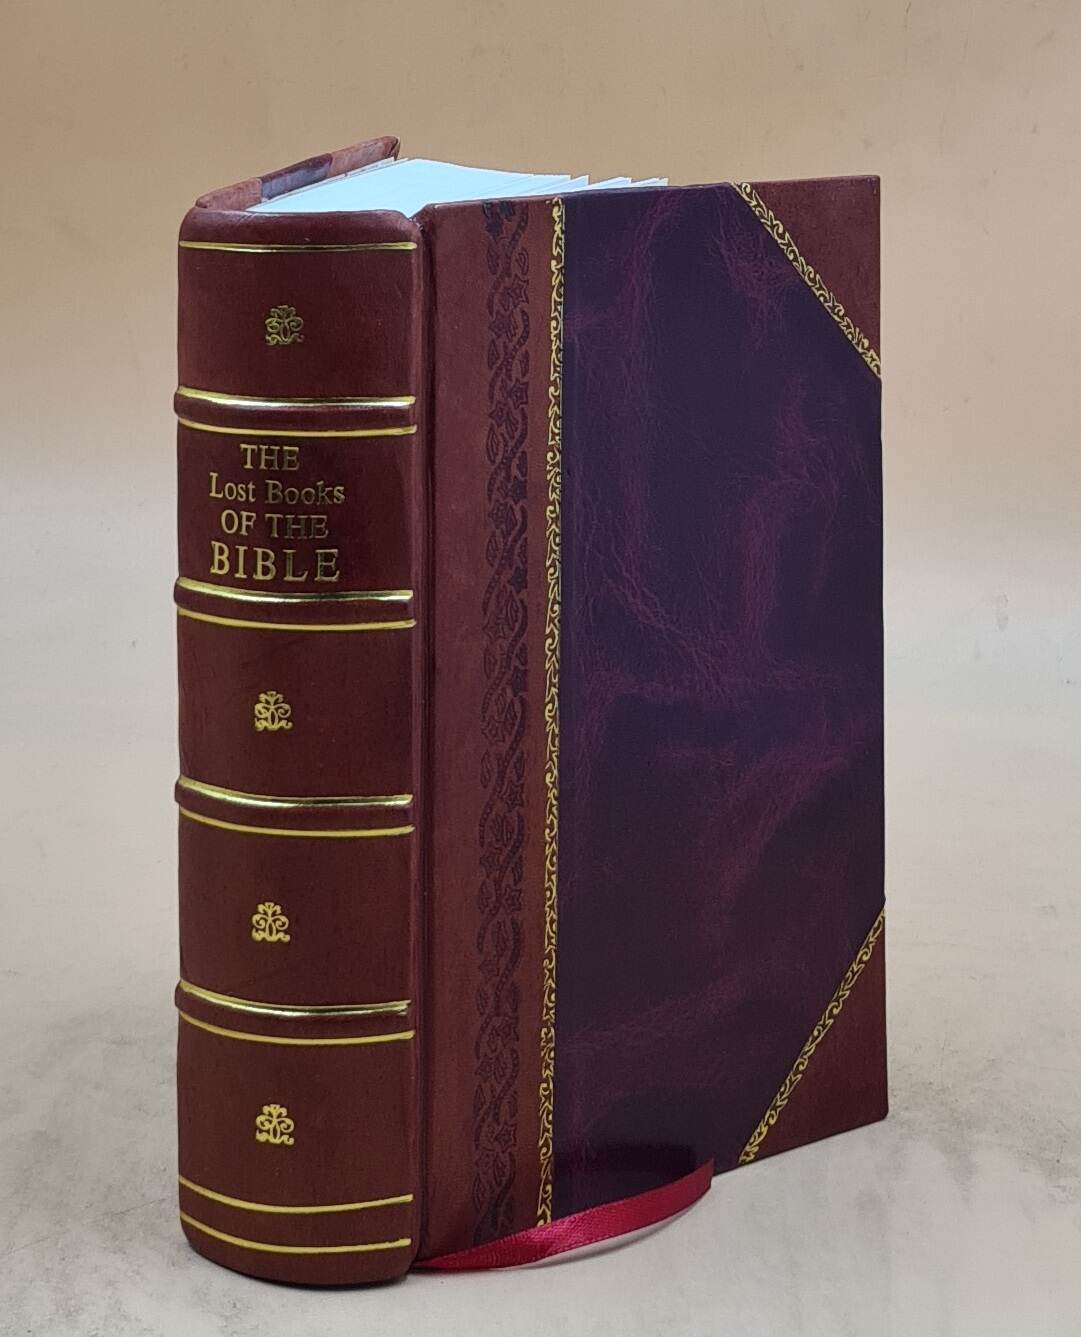 The Lost Books of the Bible. 1926 [LEATHER BOUND]